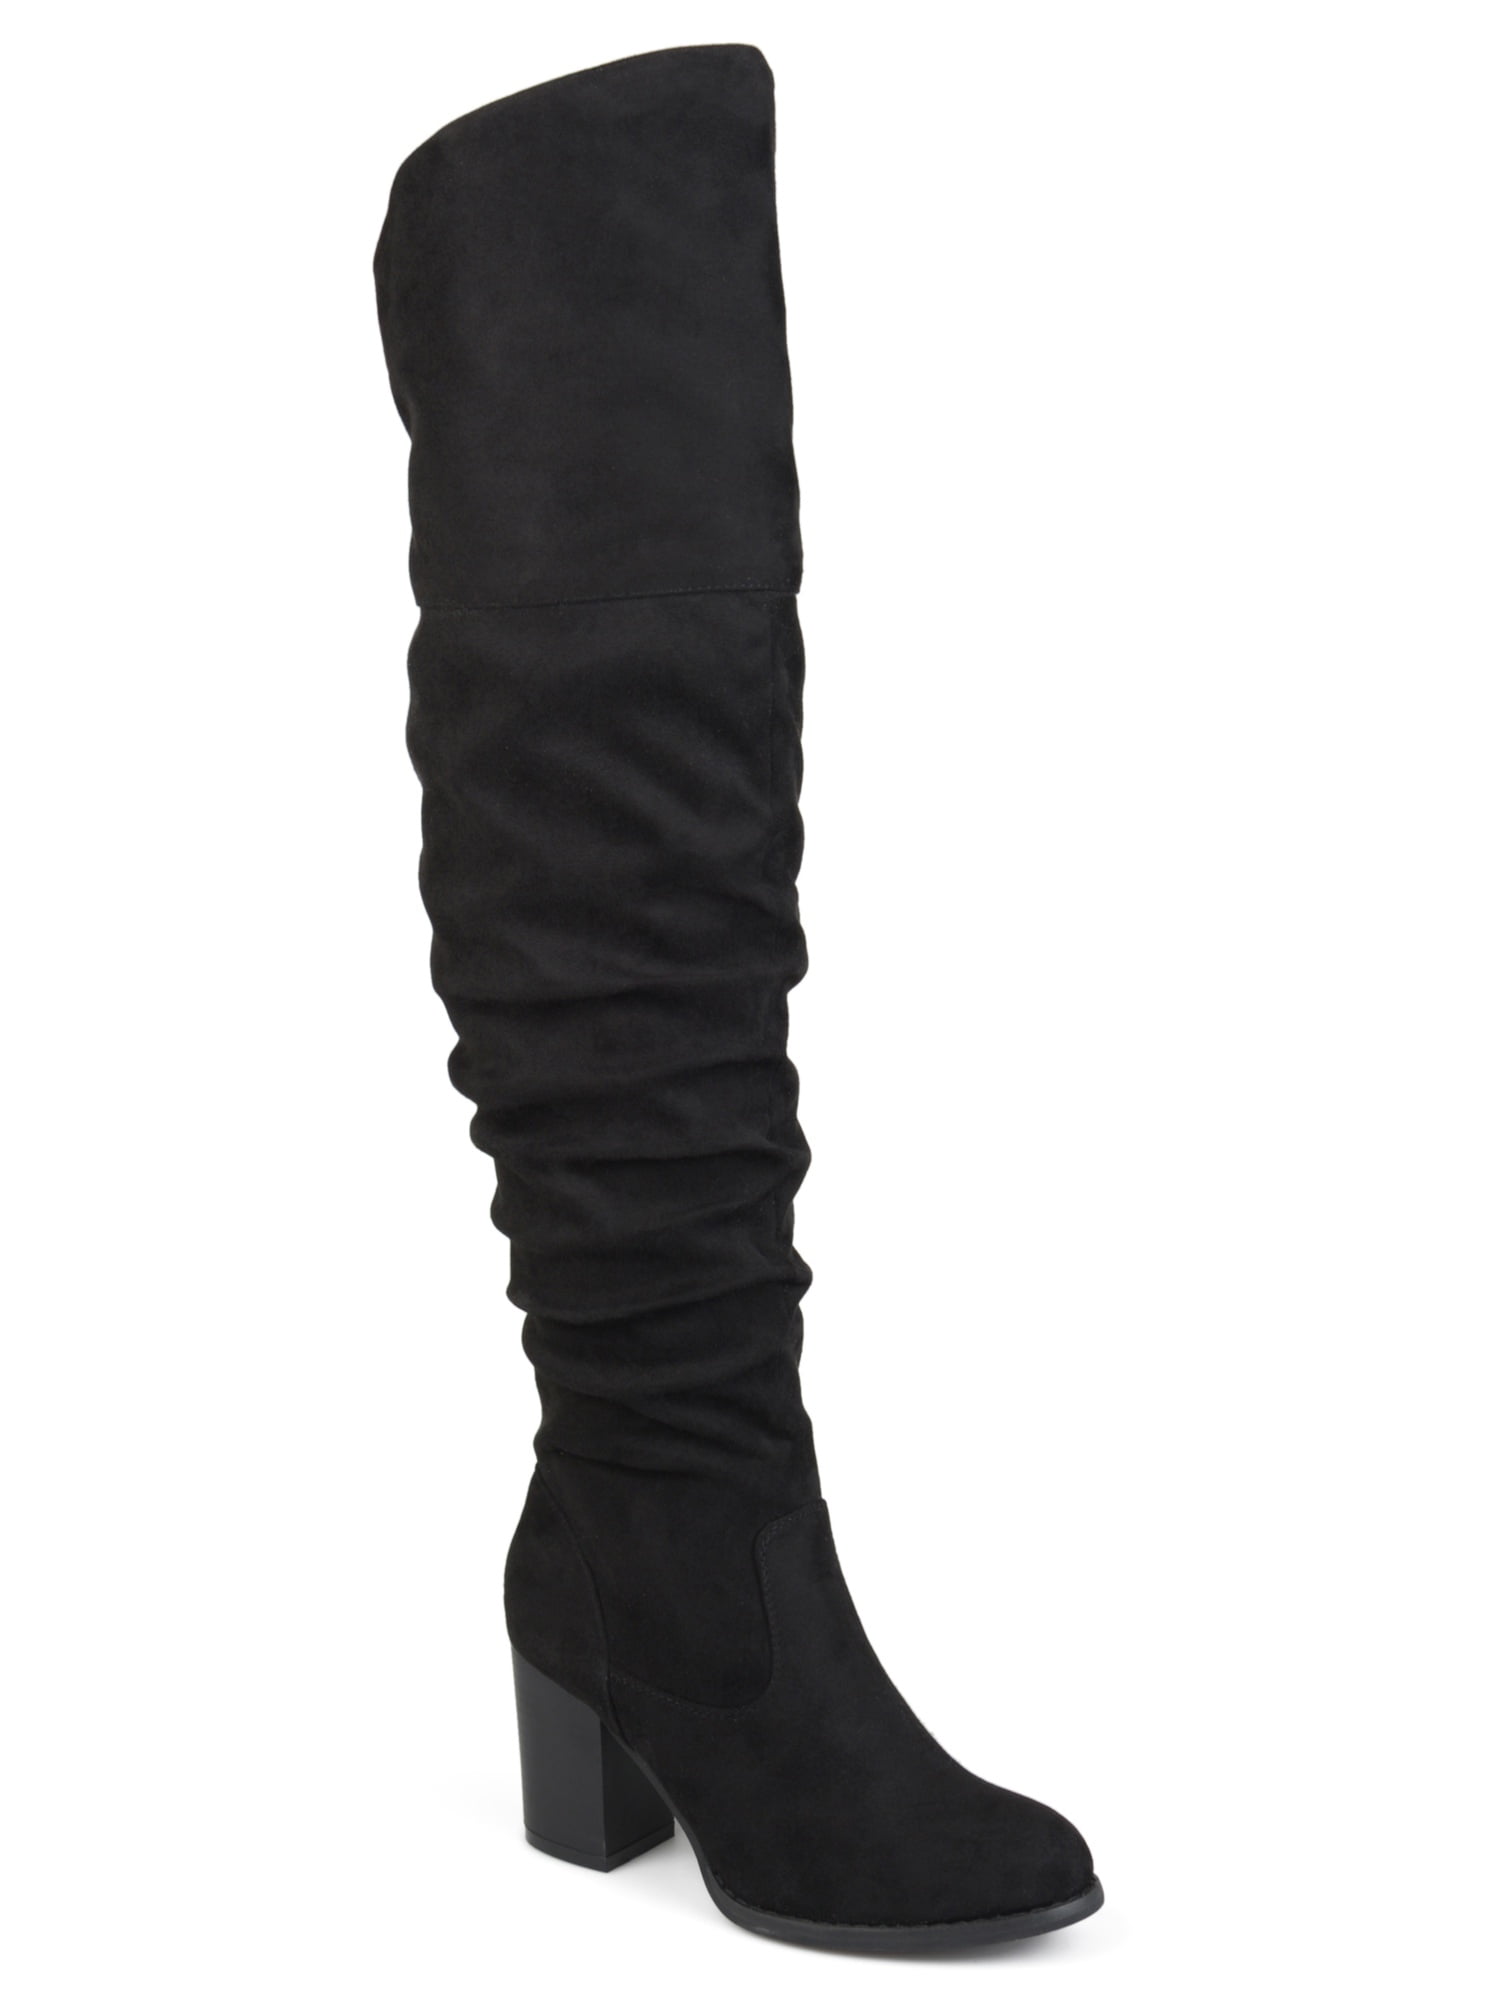 Women's Ruched Stacked Heel Faux Suede Over-the-knee Boots - Walmart.com